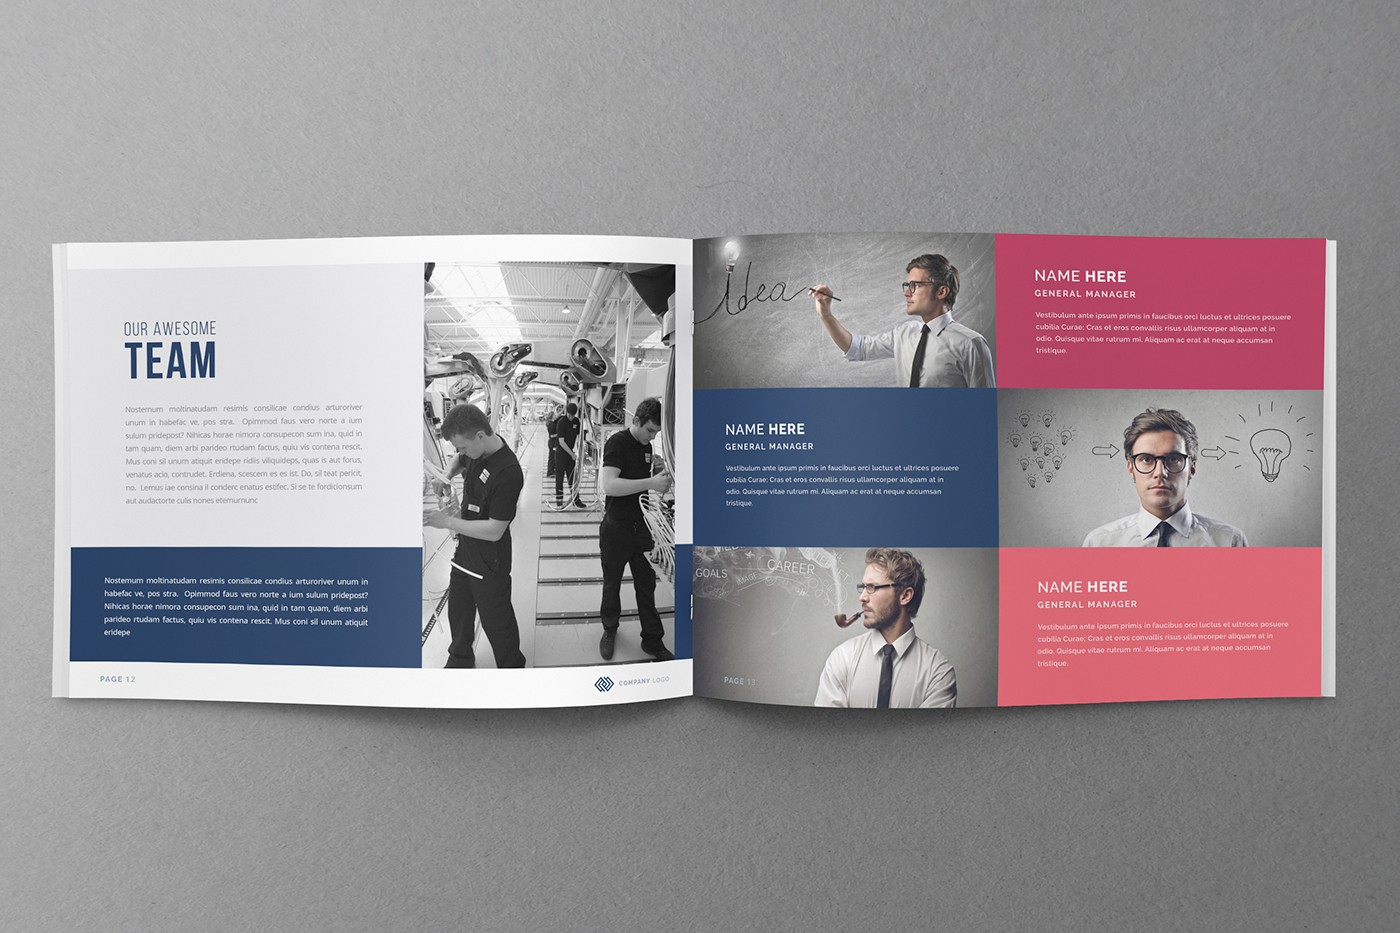 ANNUAL annual report blue brochure business business brochure corporate Design Templates financial free graphic river graphicriver icons InDesign template